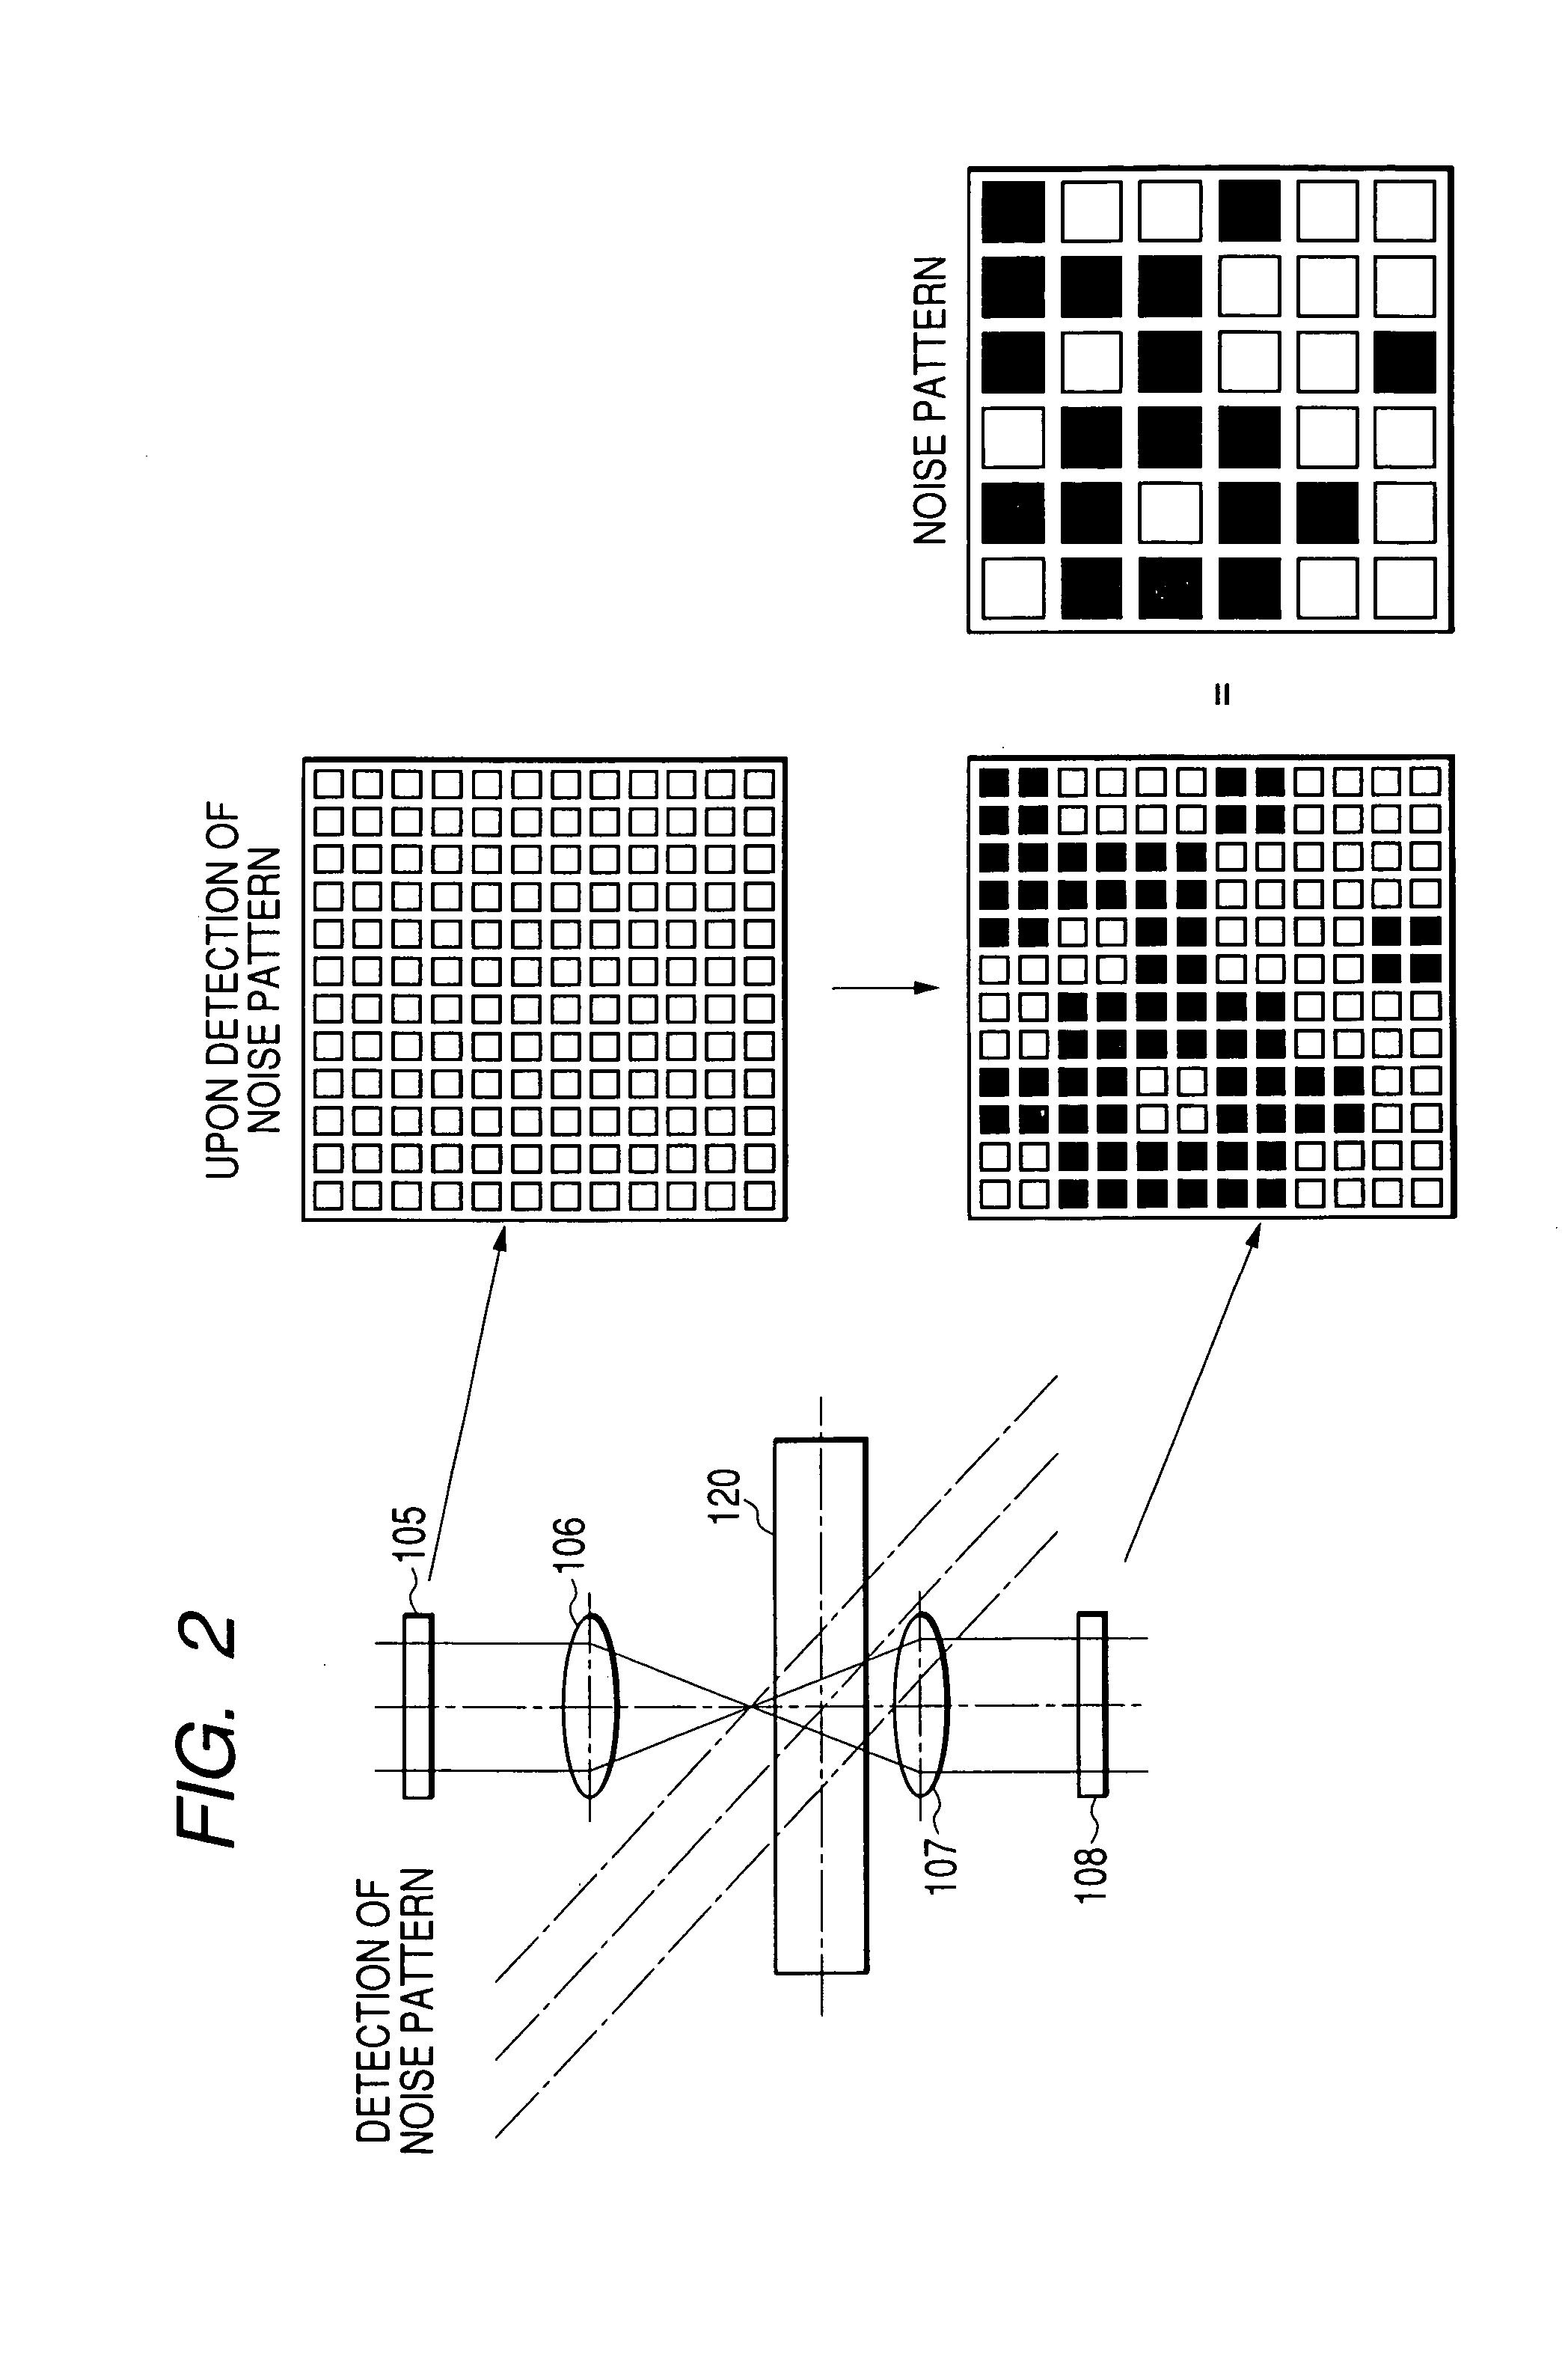 Holographic recording and reproducing apparatus